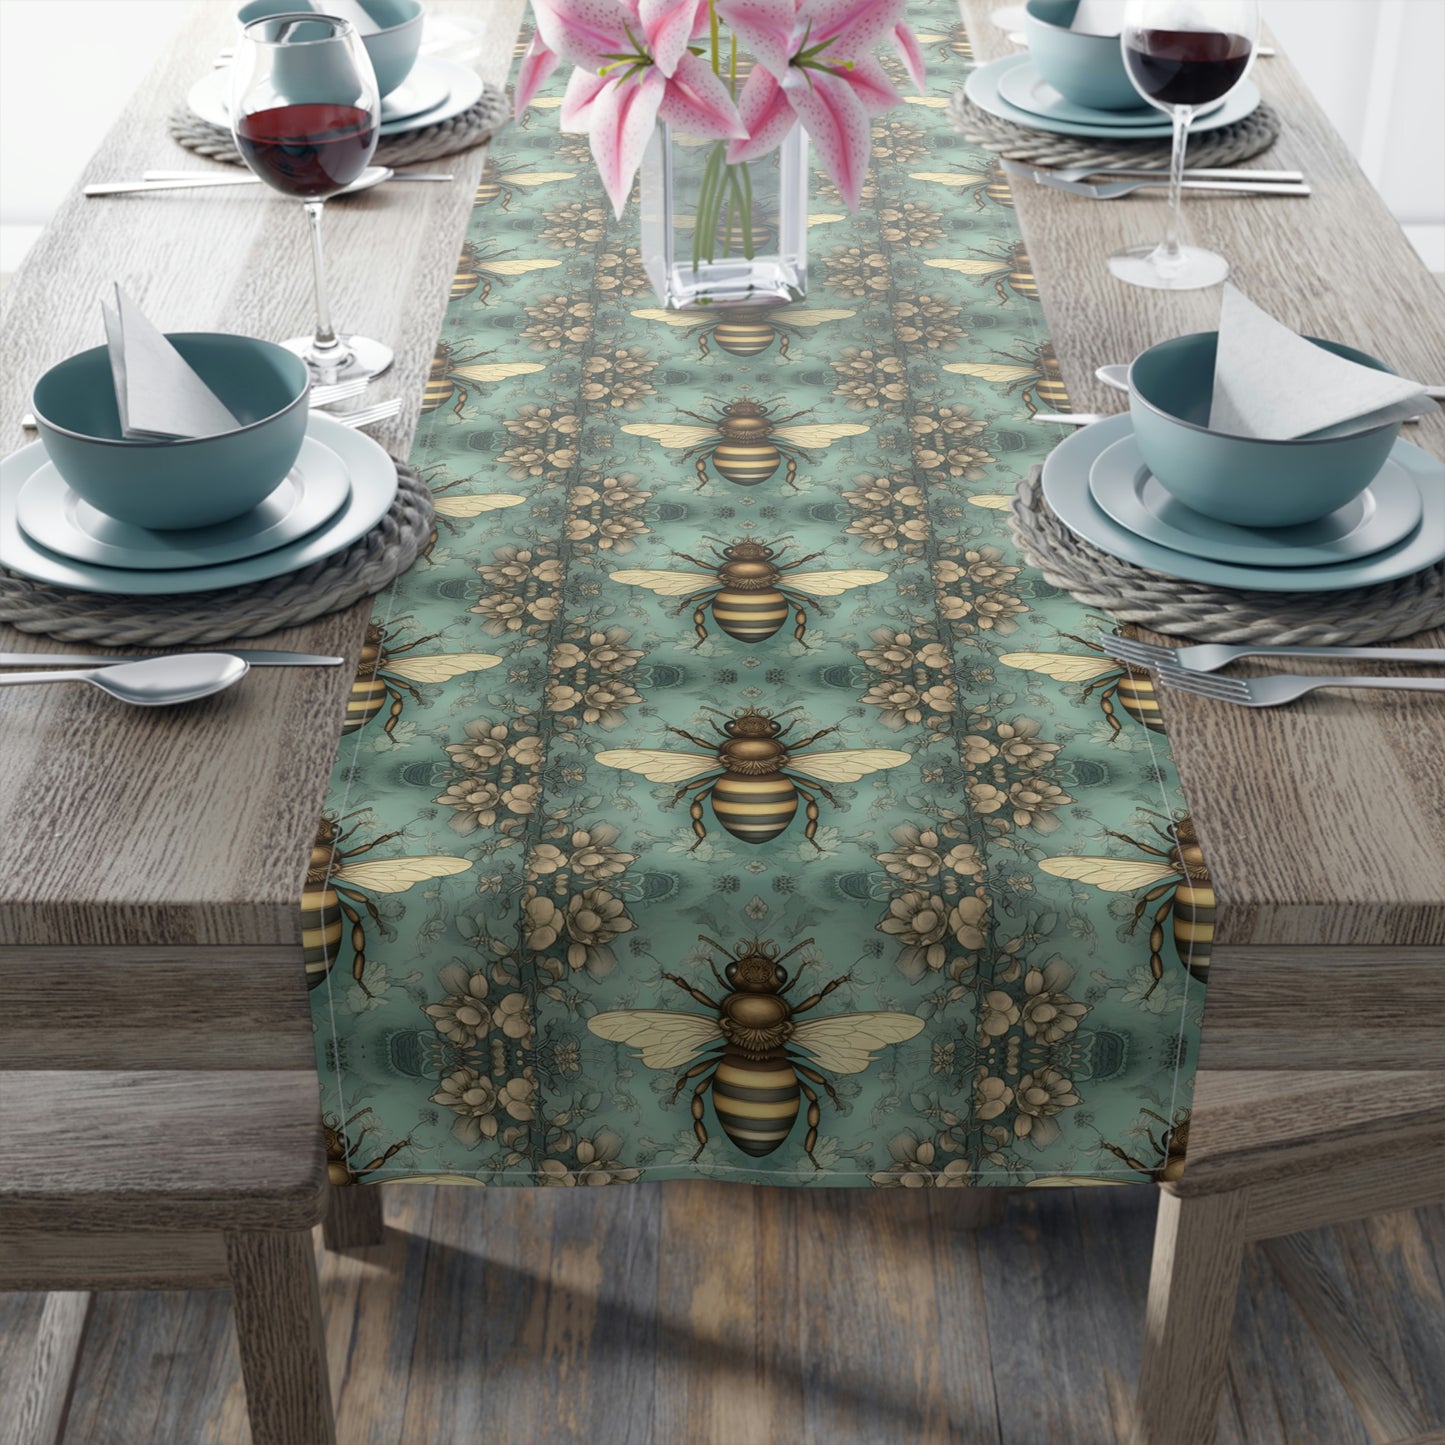 summer table runner with antique honey bee and flowers on a teal blue background